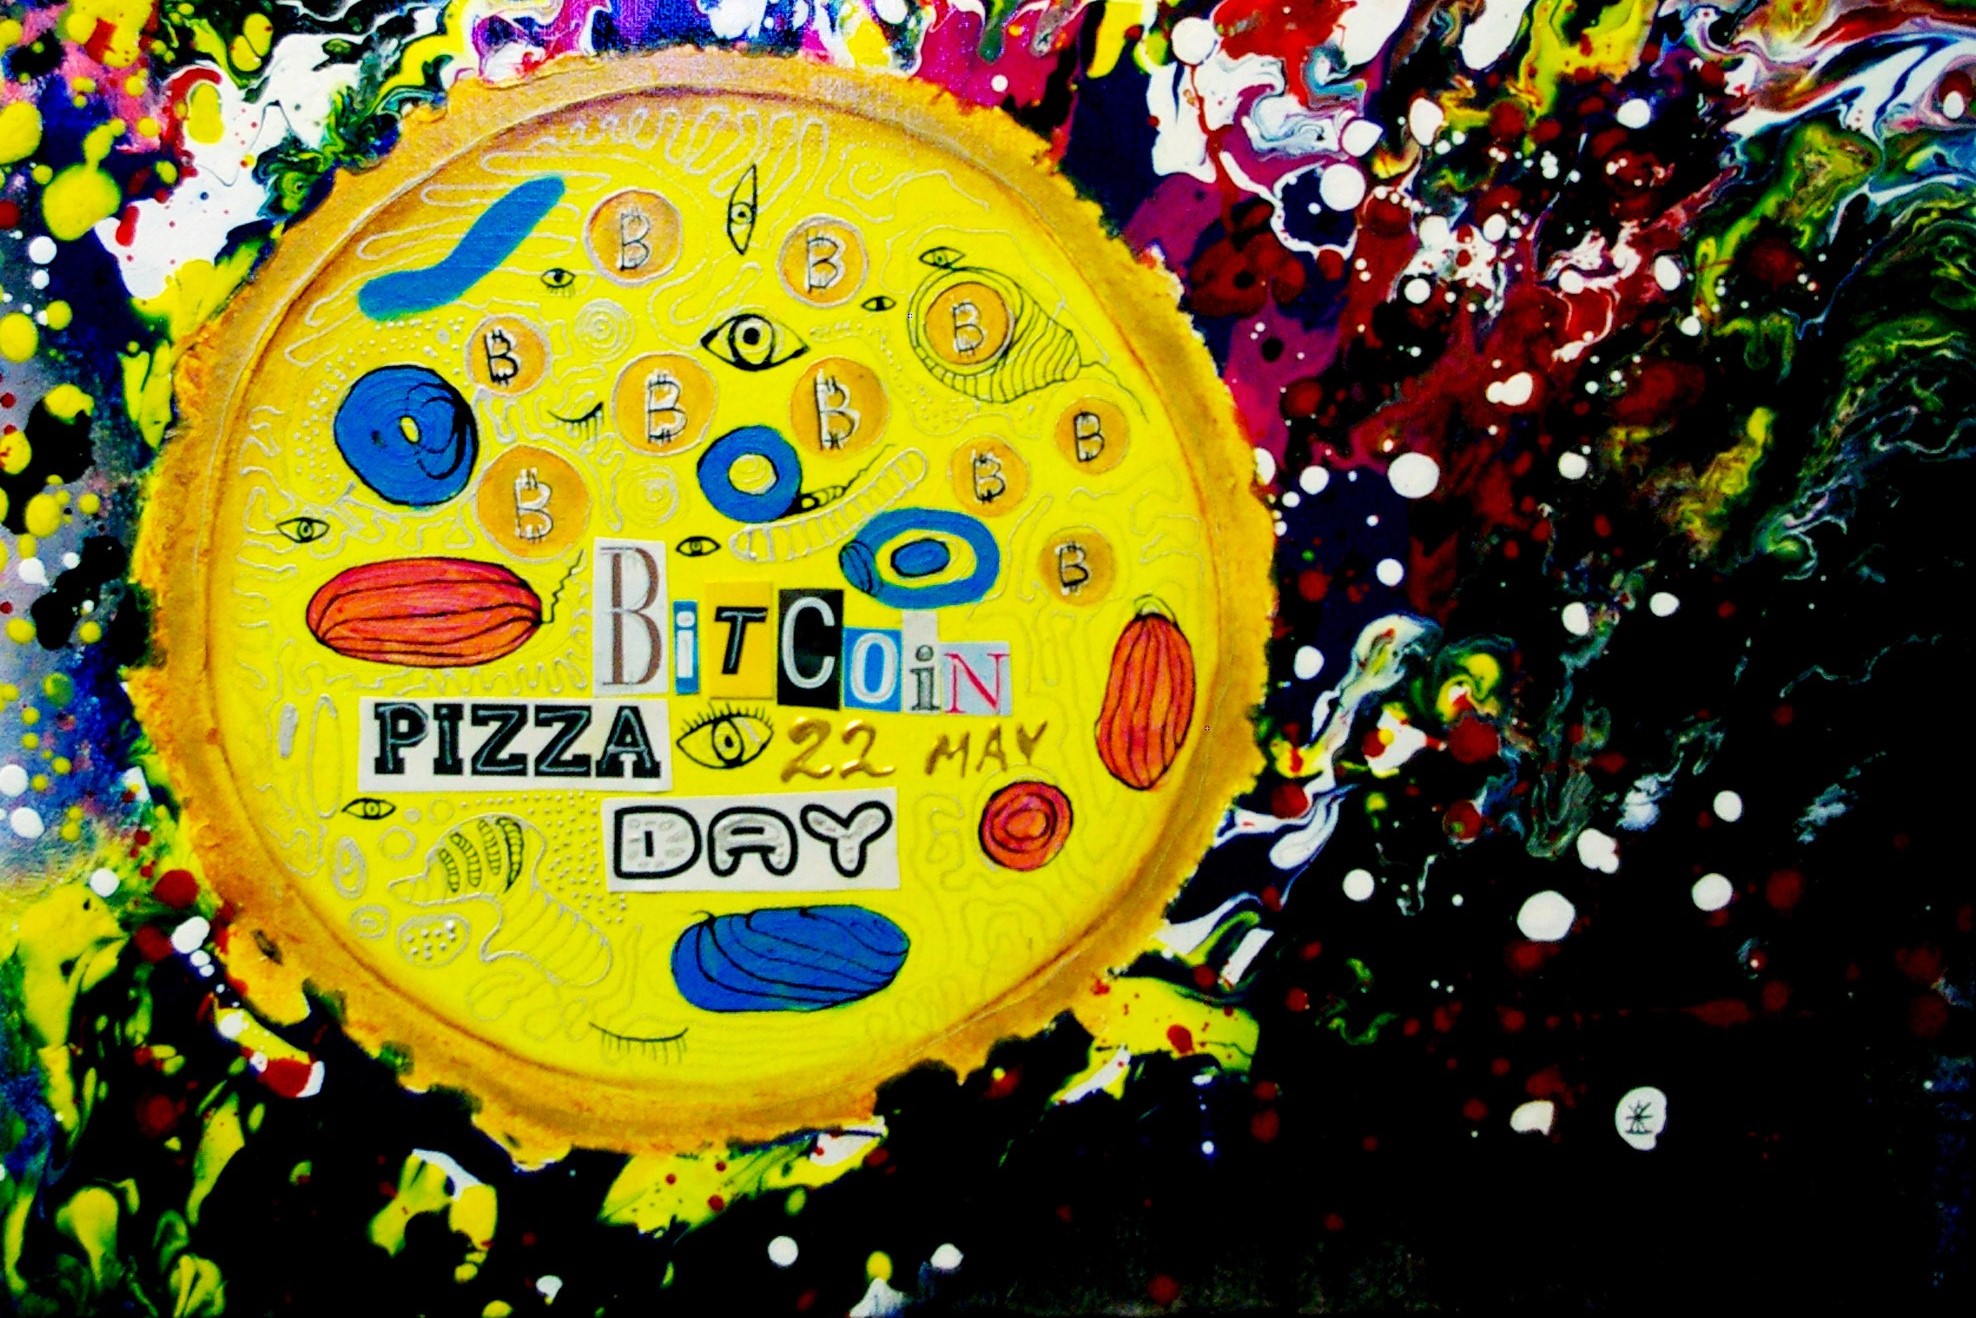 Bitcoin Pizza Day Menu: Jokes, Events, New Products and Kebab